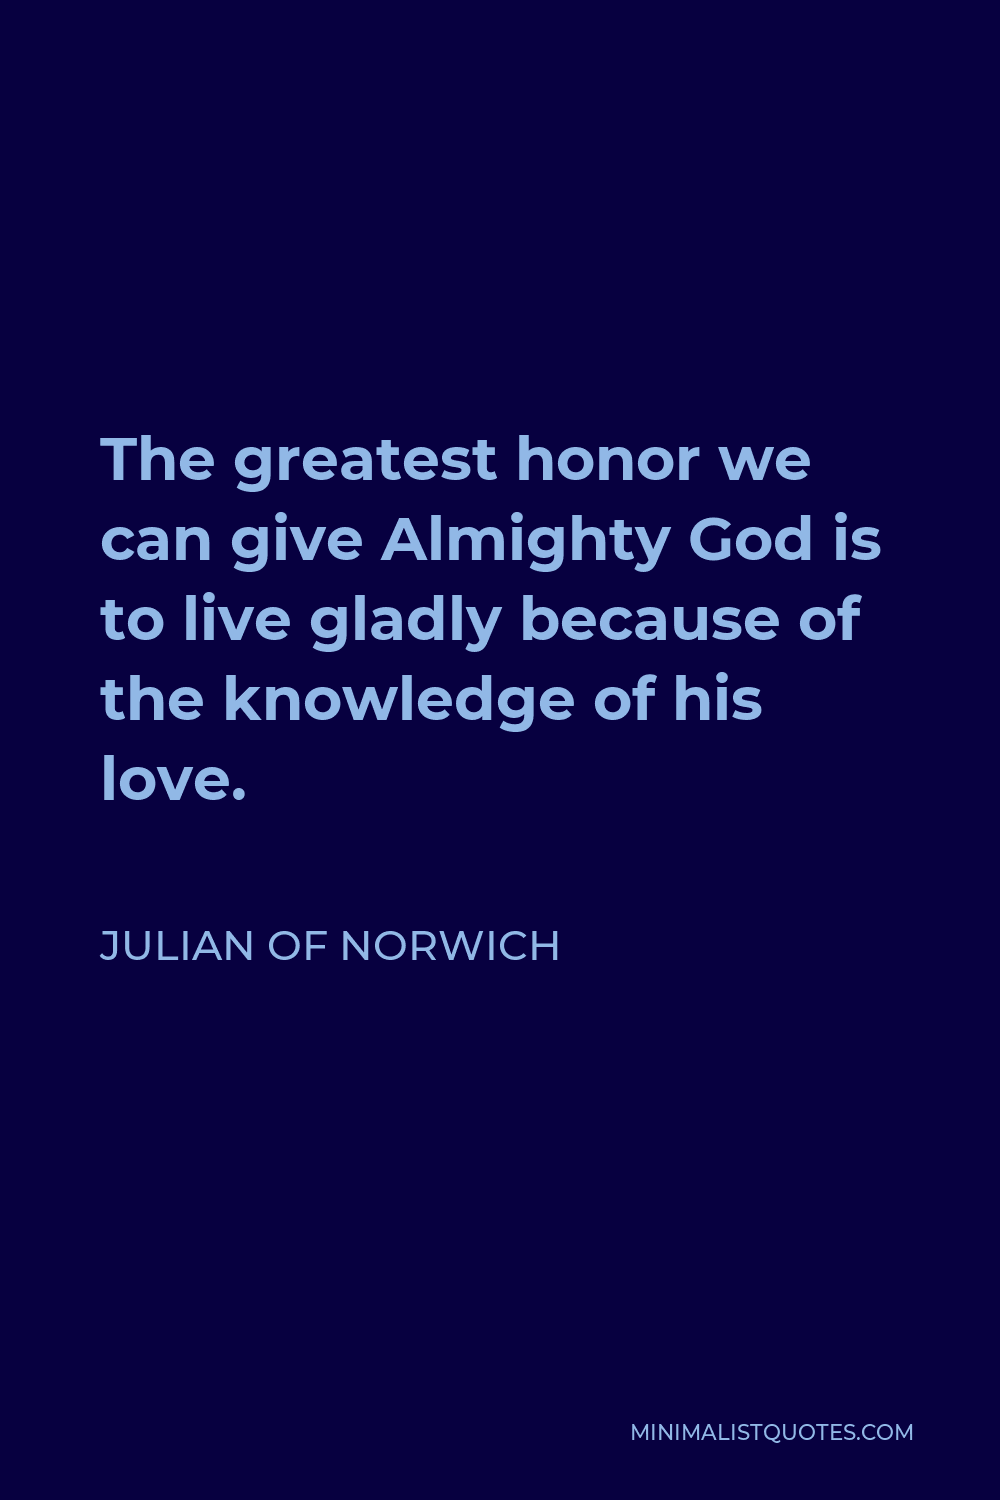 Julian of Norwich Quote - The greatest honor we can give Almighty God is to live gladly because of the knowledge of his love.